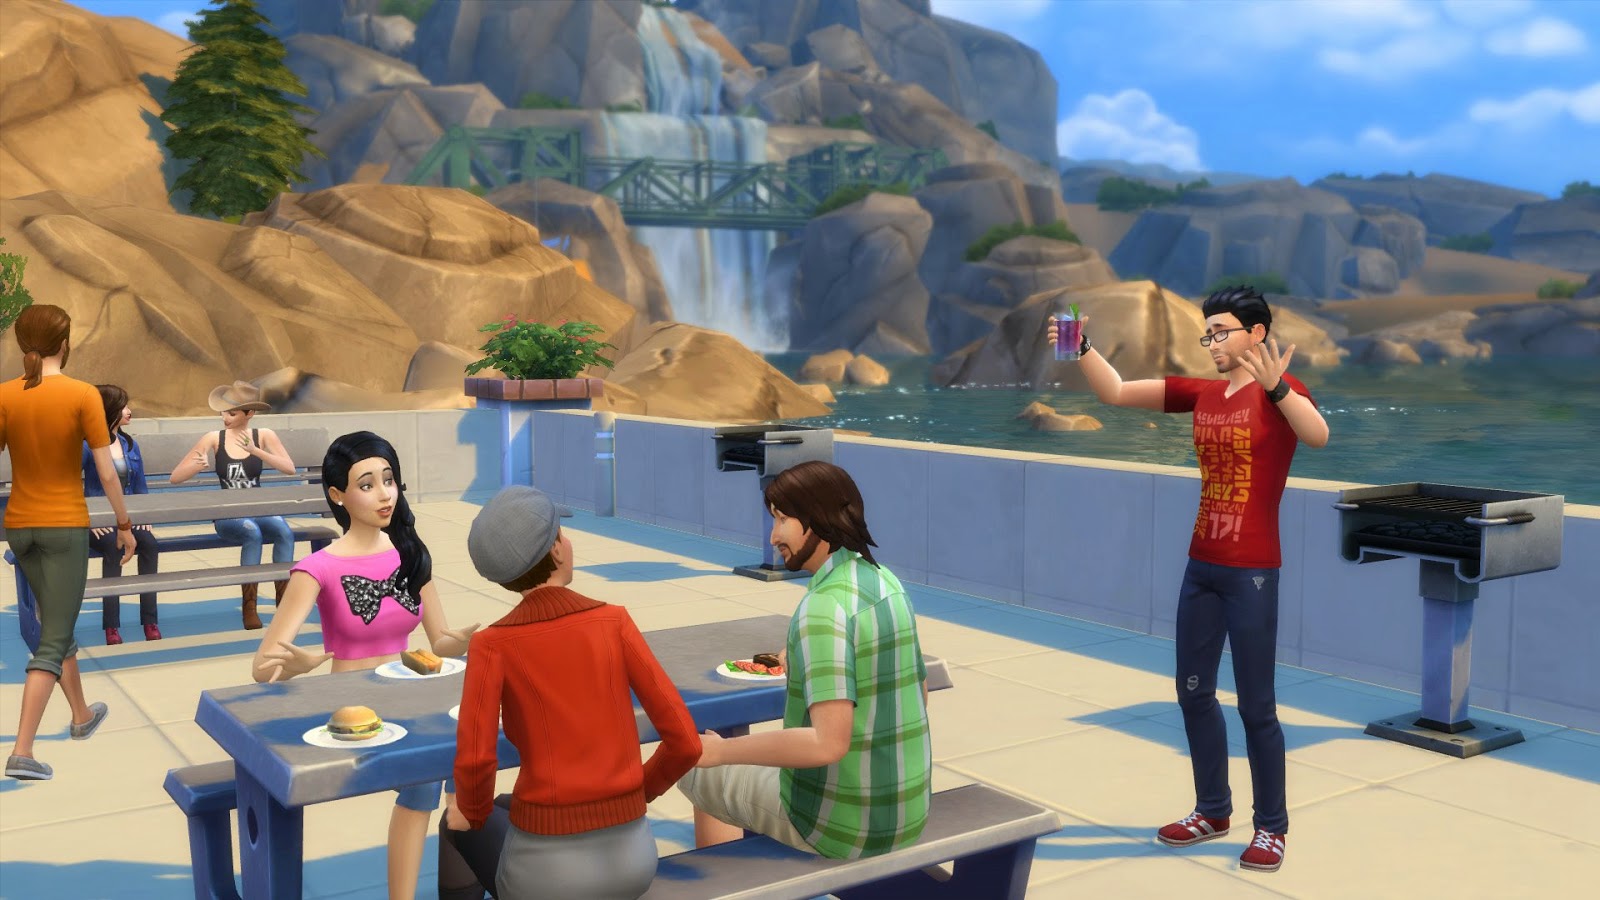 How to download sims 4 deluxe edition for free lkeget